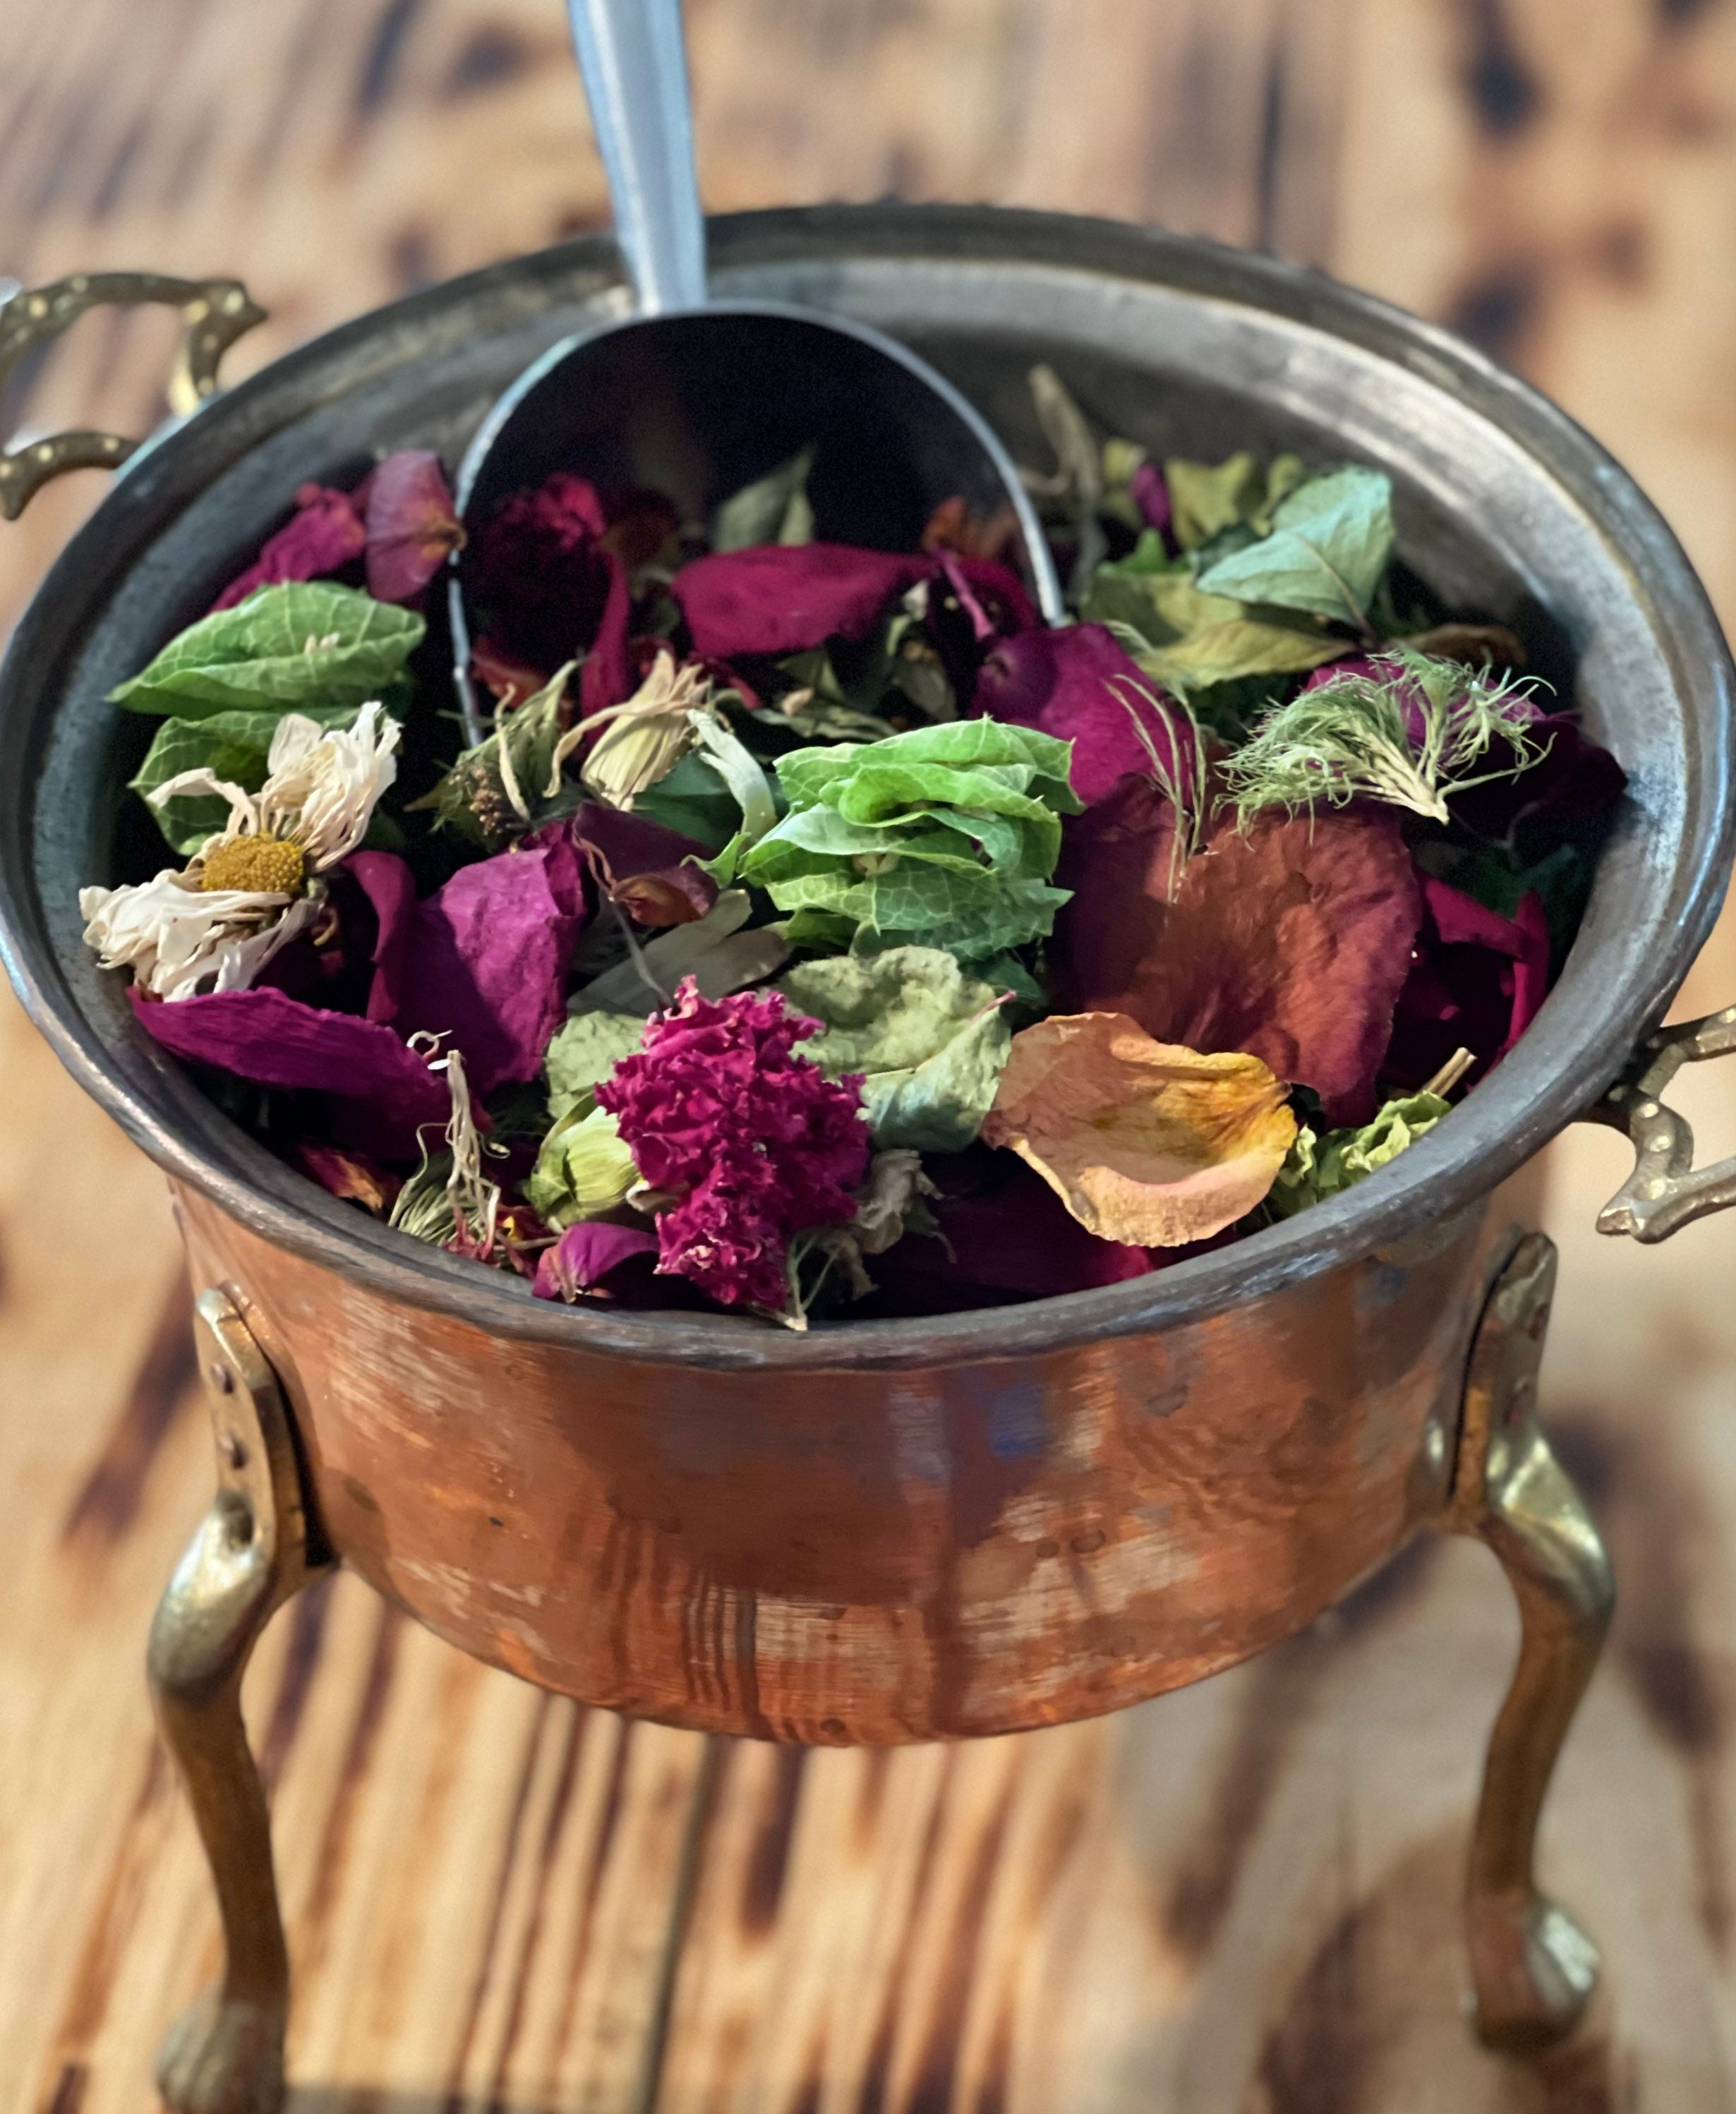 Morning Rose Potpourri by The Herb Lady